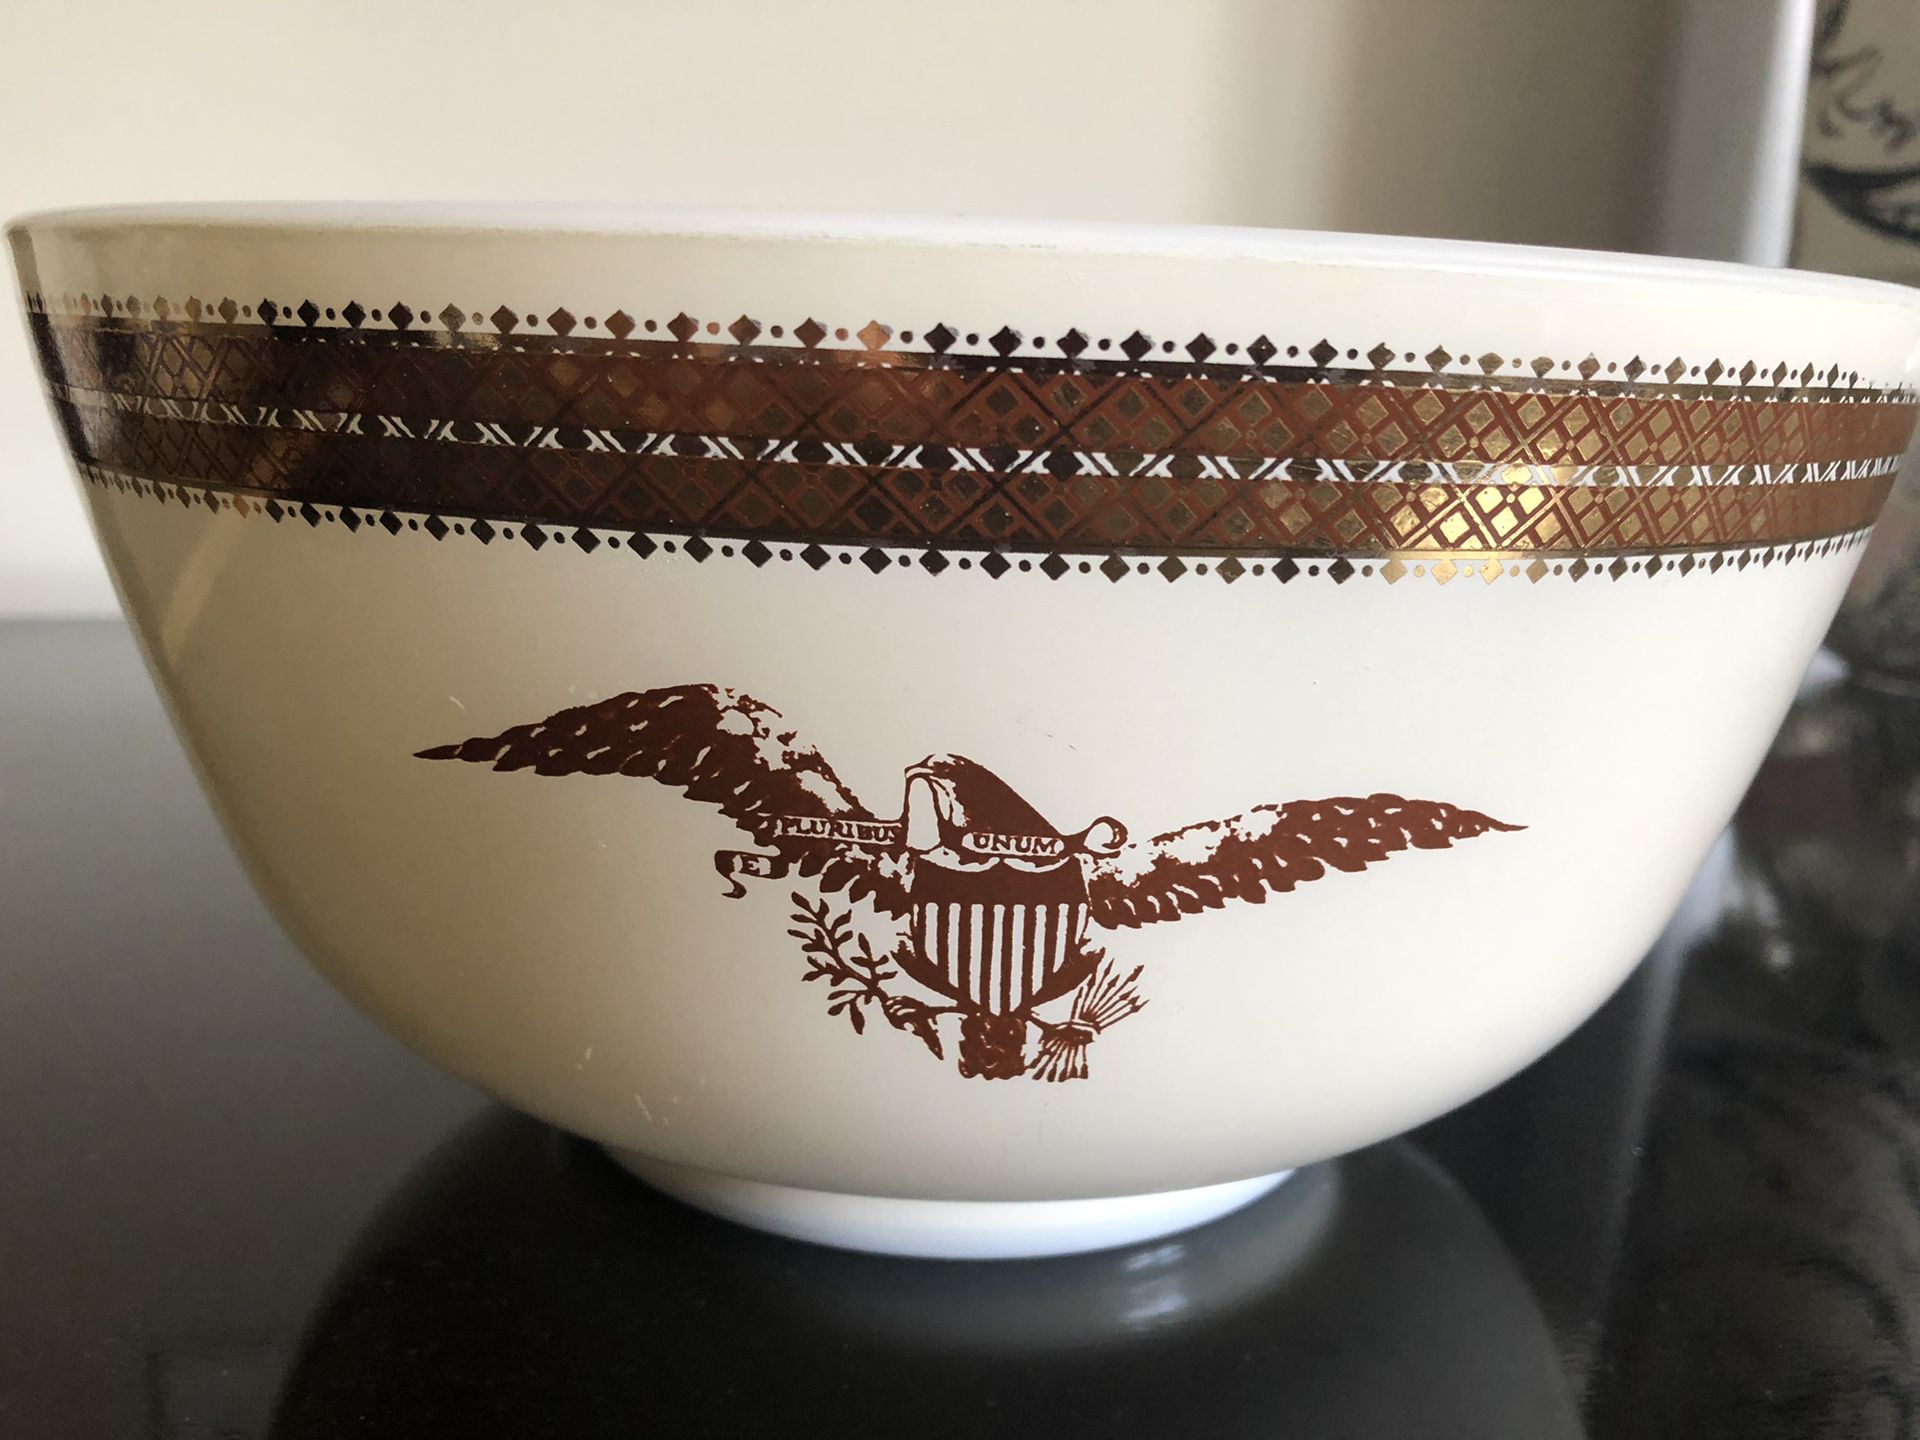 Vintage Pyrex deep dish decorated with a golden eagle